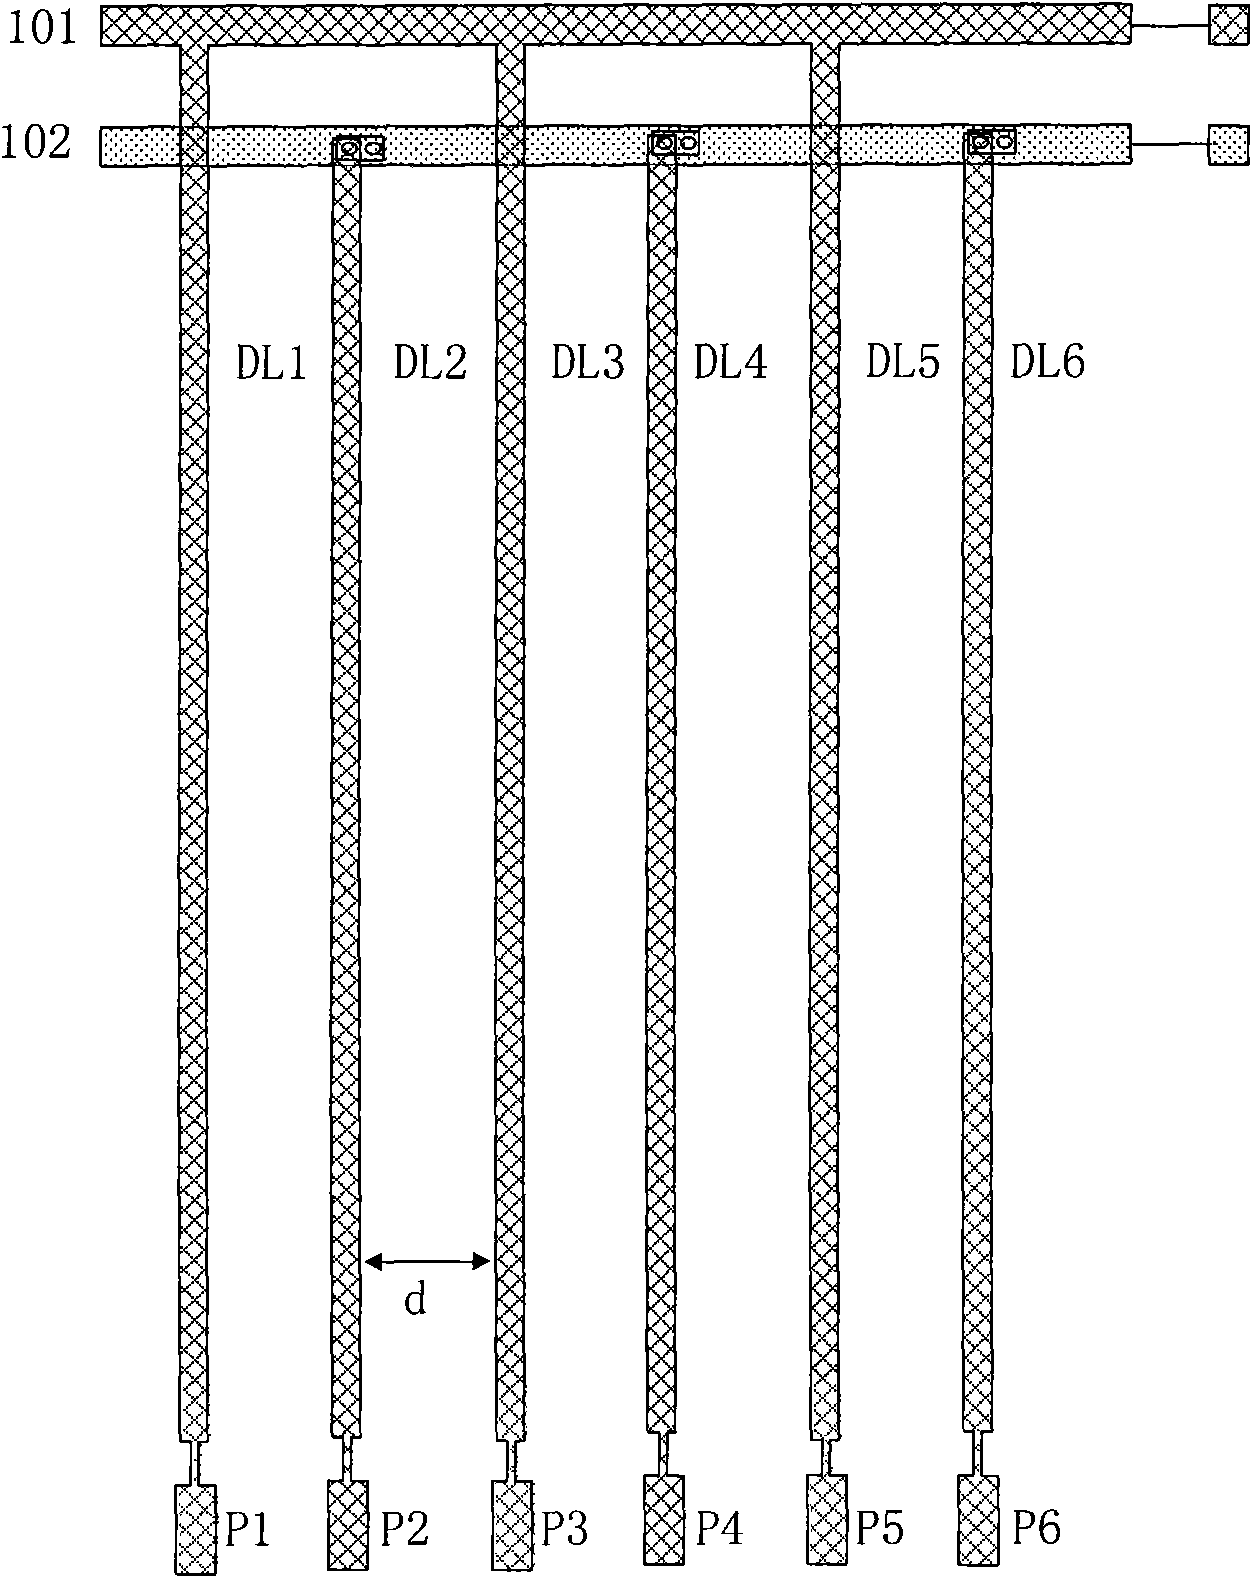 A method for testing line defects of LCD (liquid crystal display) panel, array substrate and drive wires